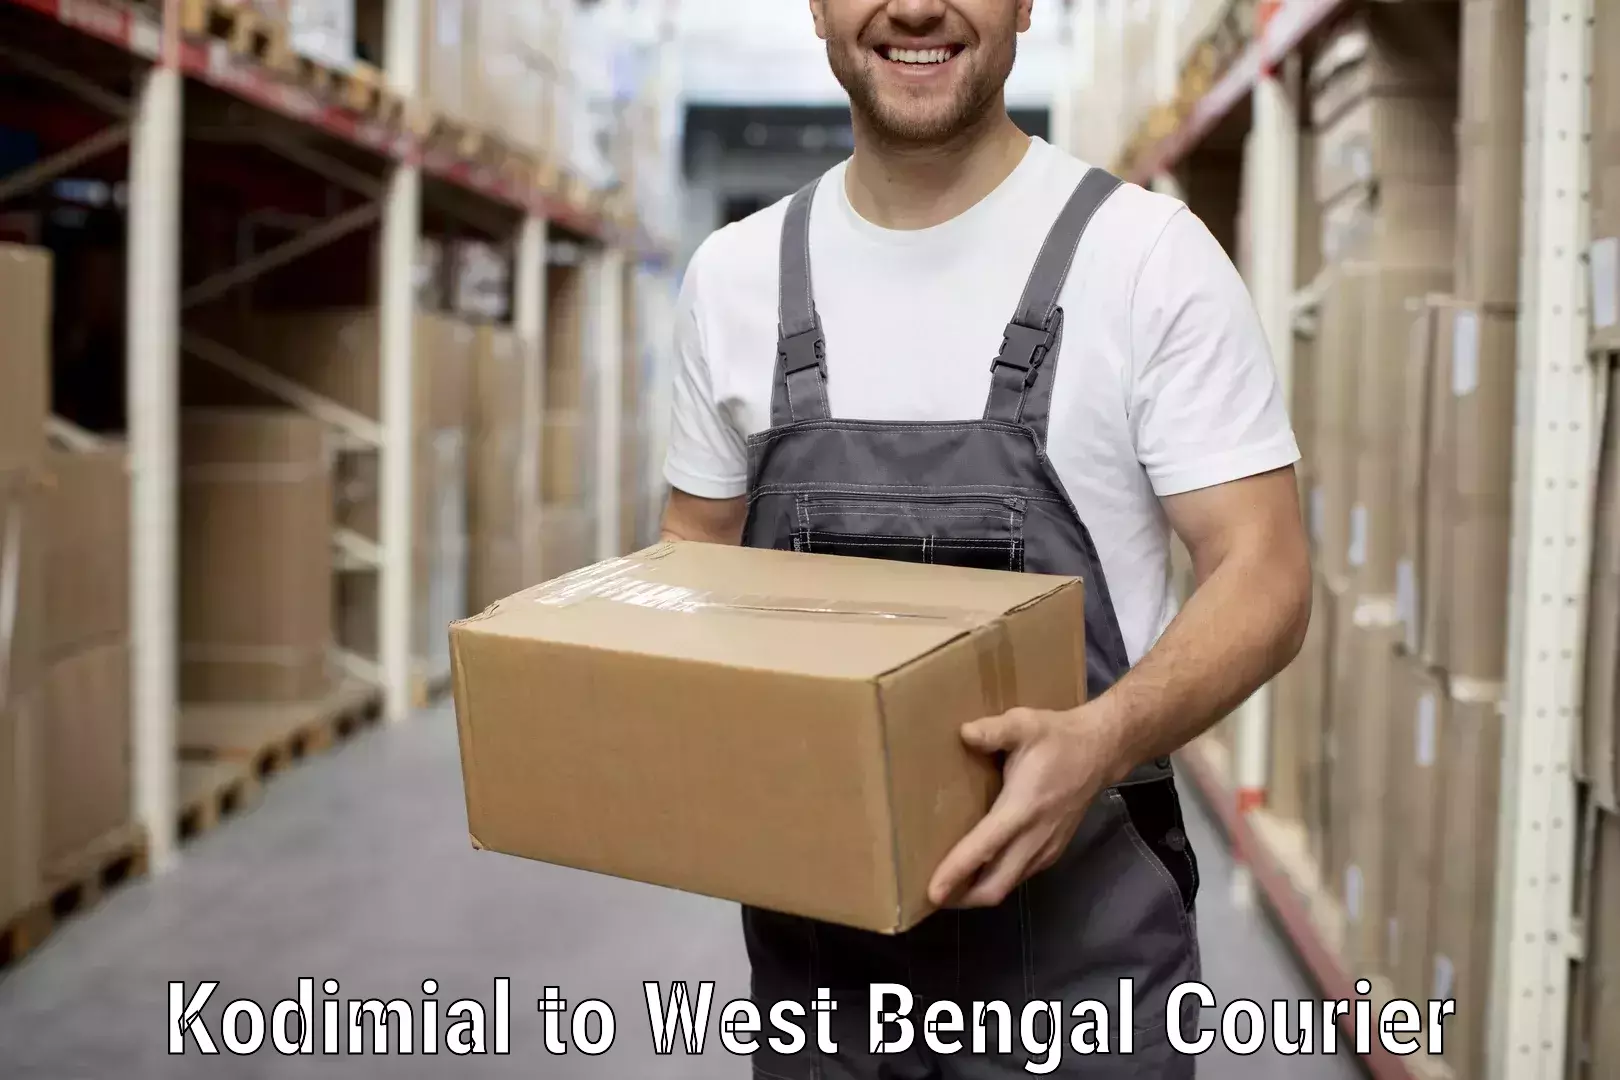 Full-service movers in Kodimial to West Bengal